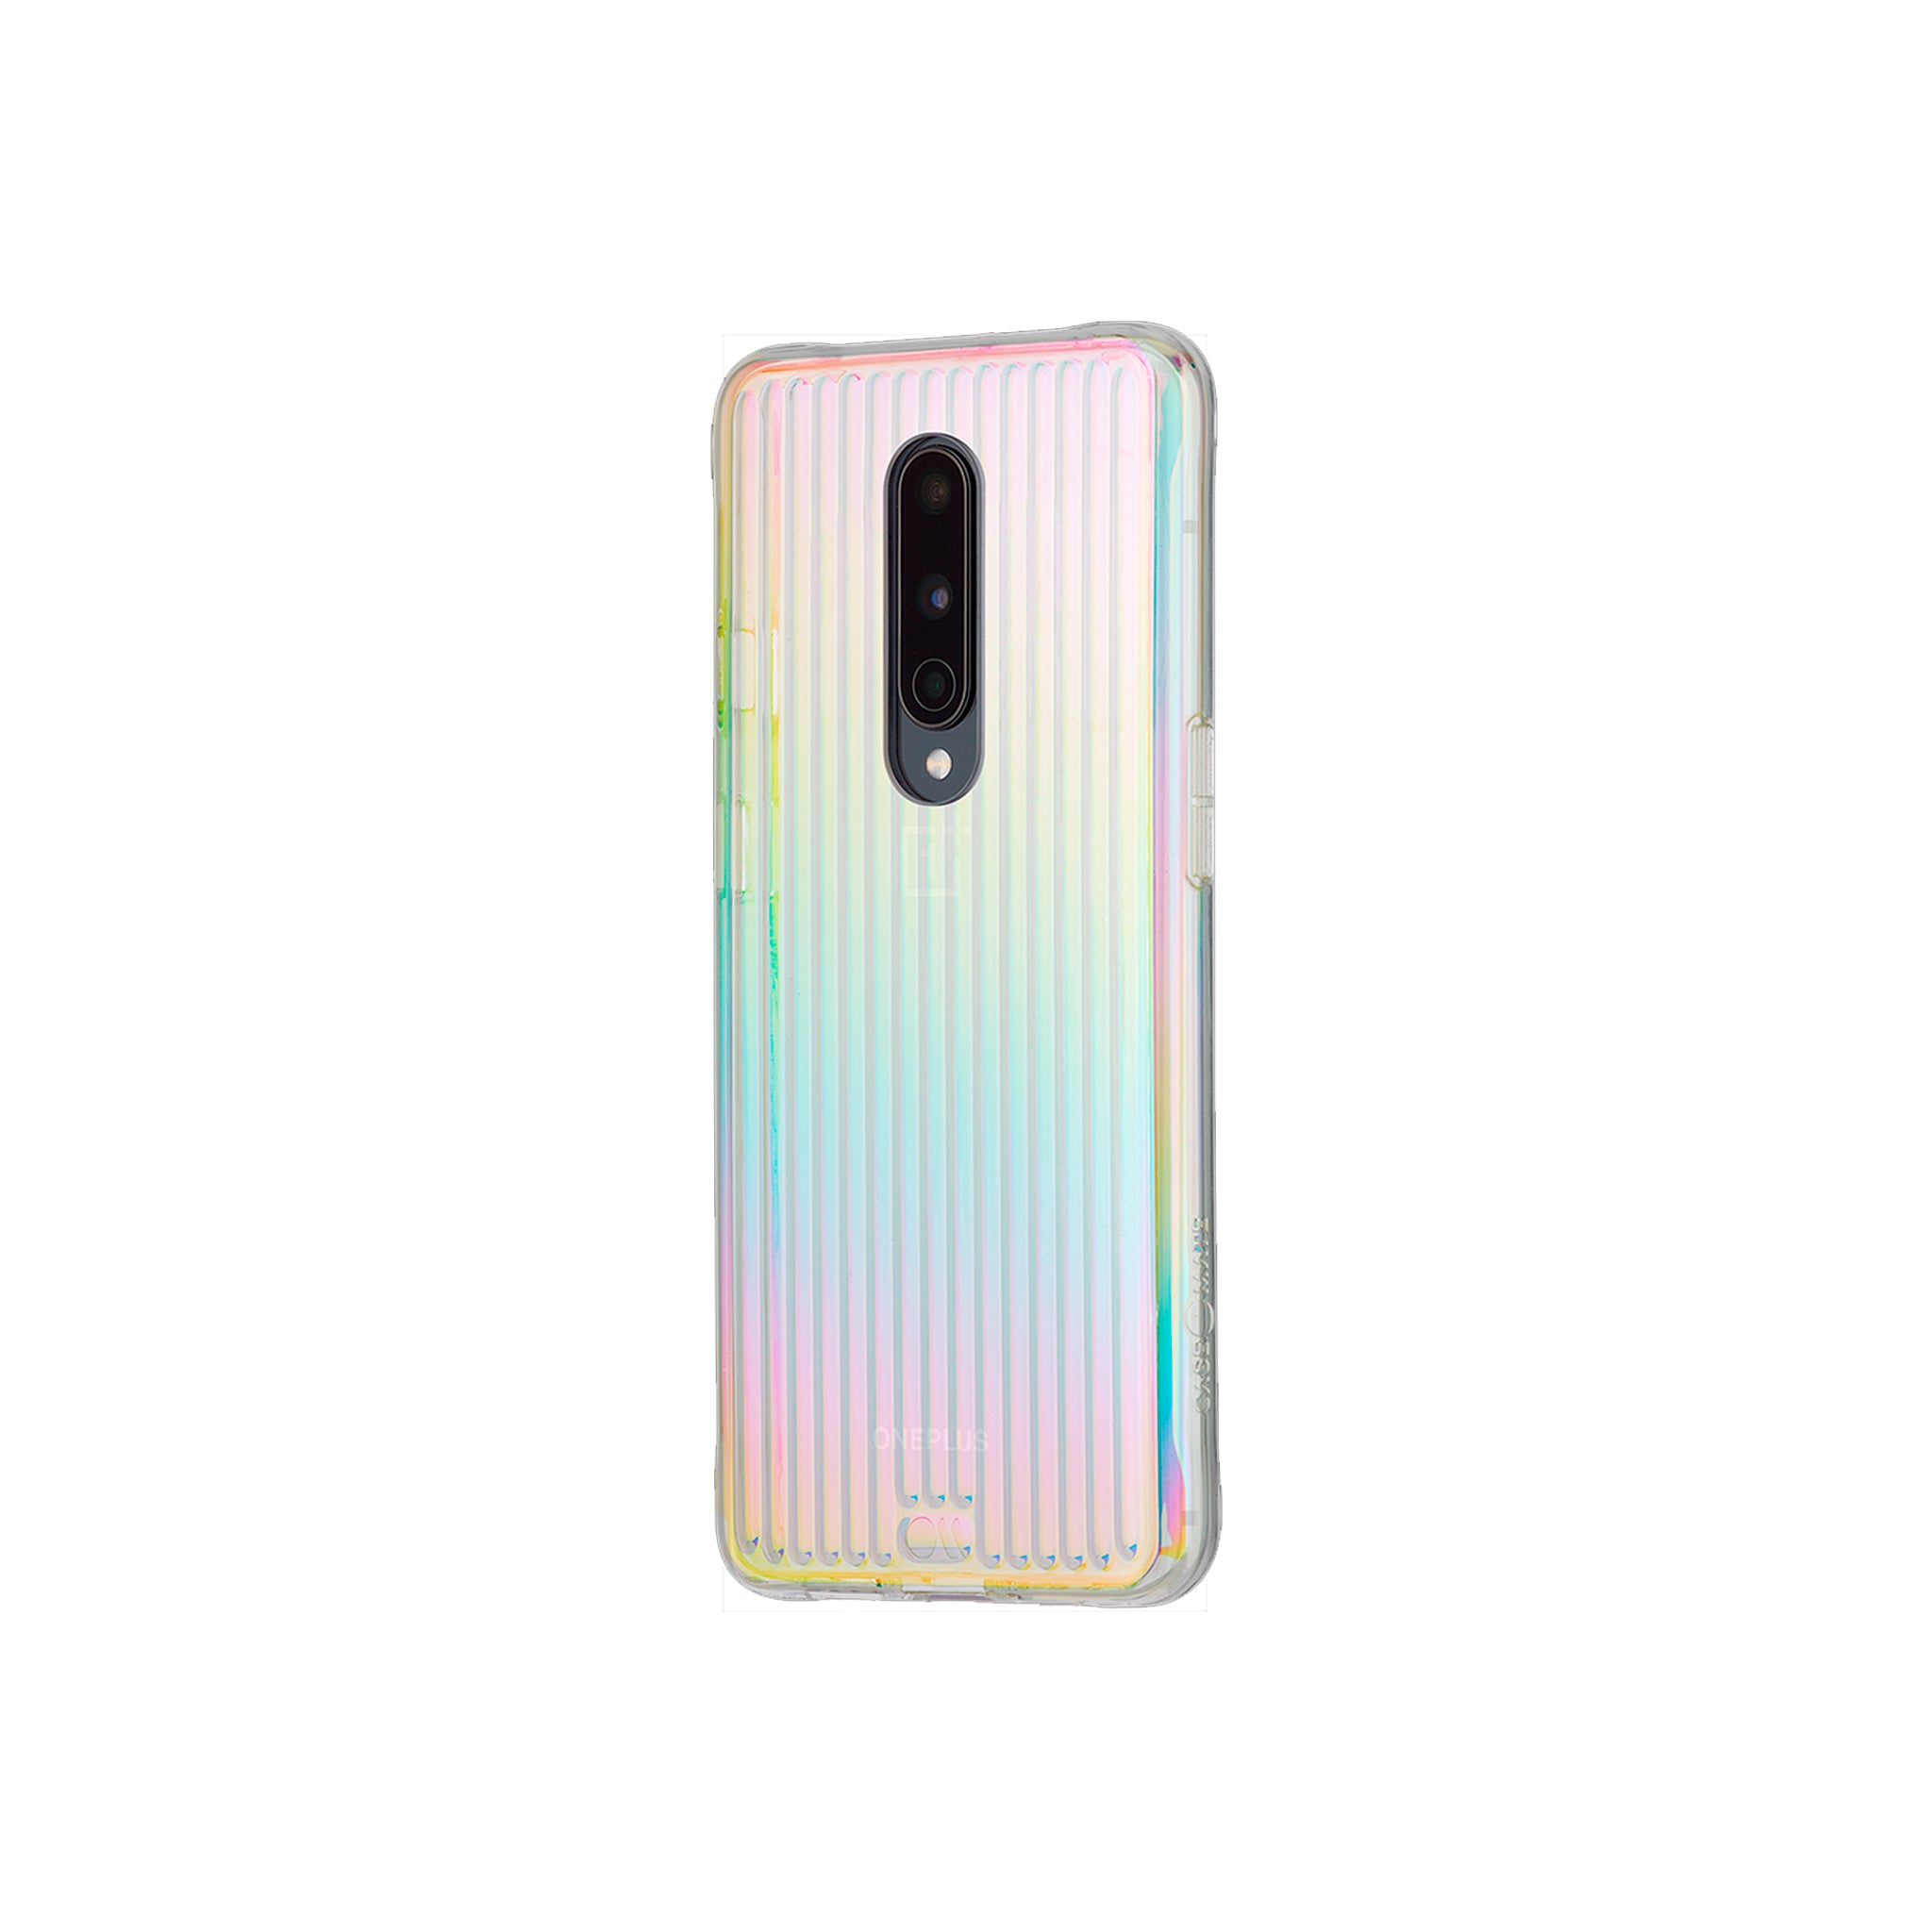 Case-mate - Tough Groove Case For Oneplus 8 (not Verizon) - Iridescent